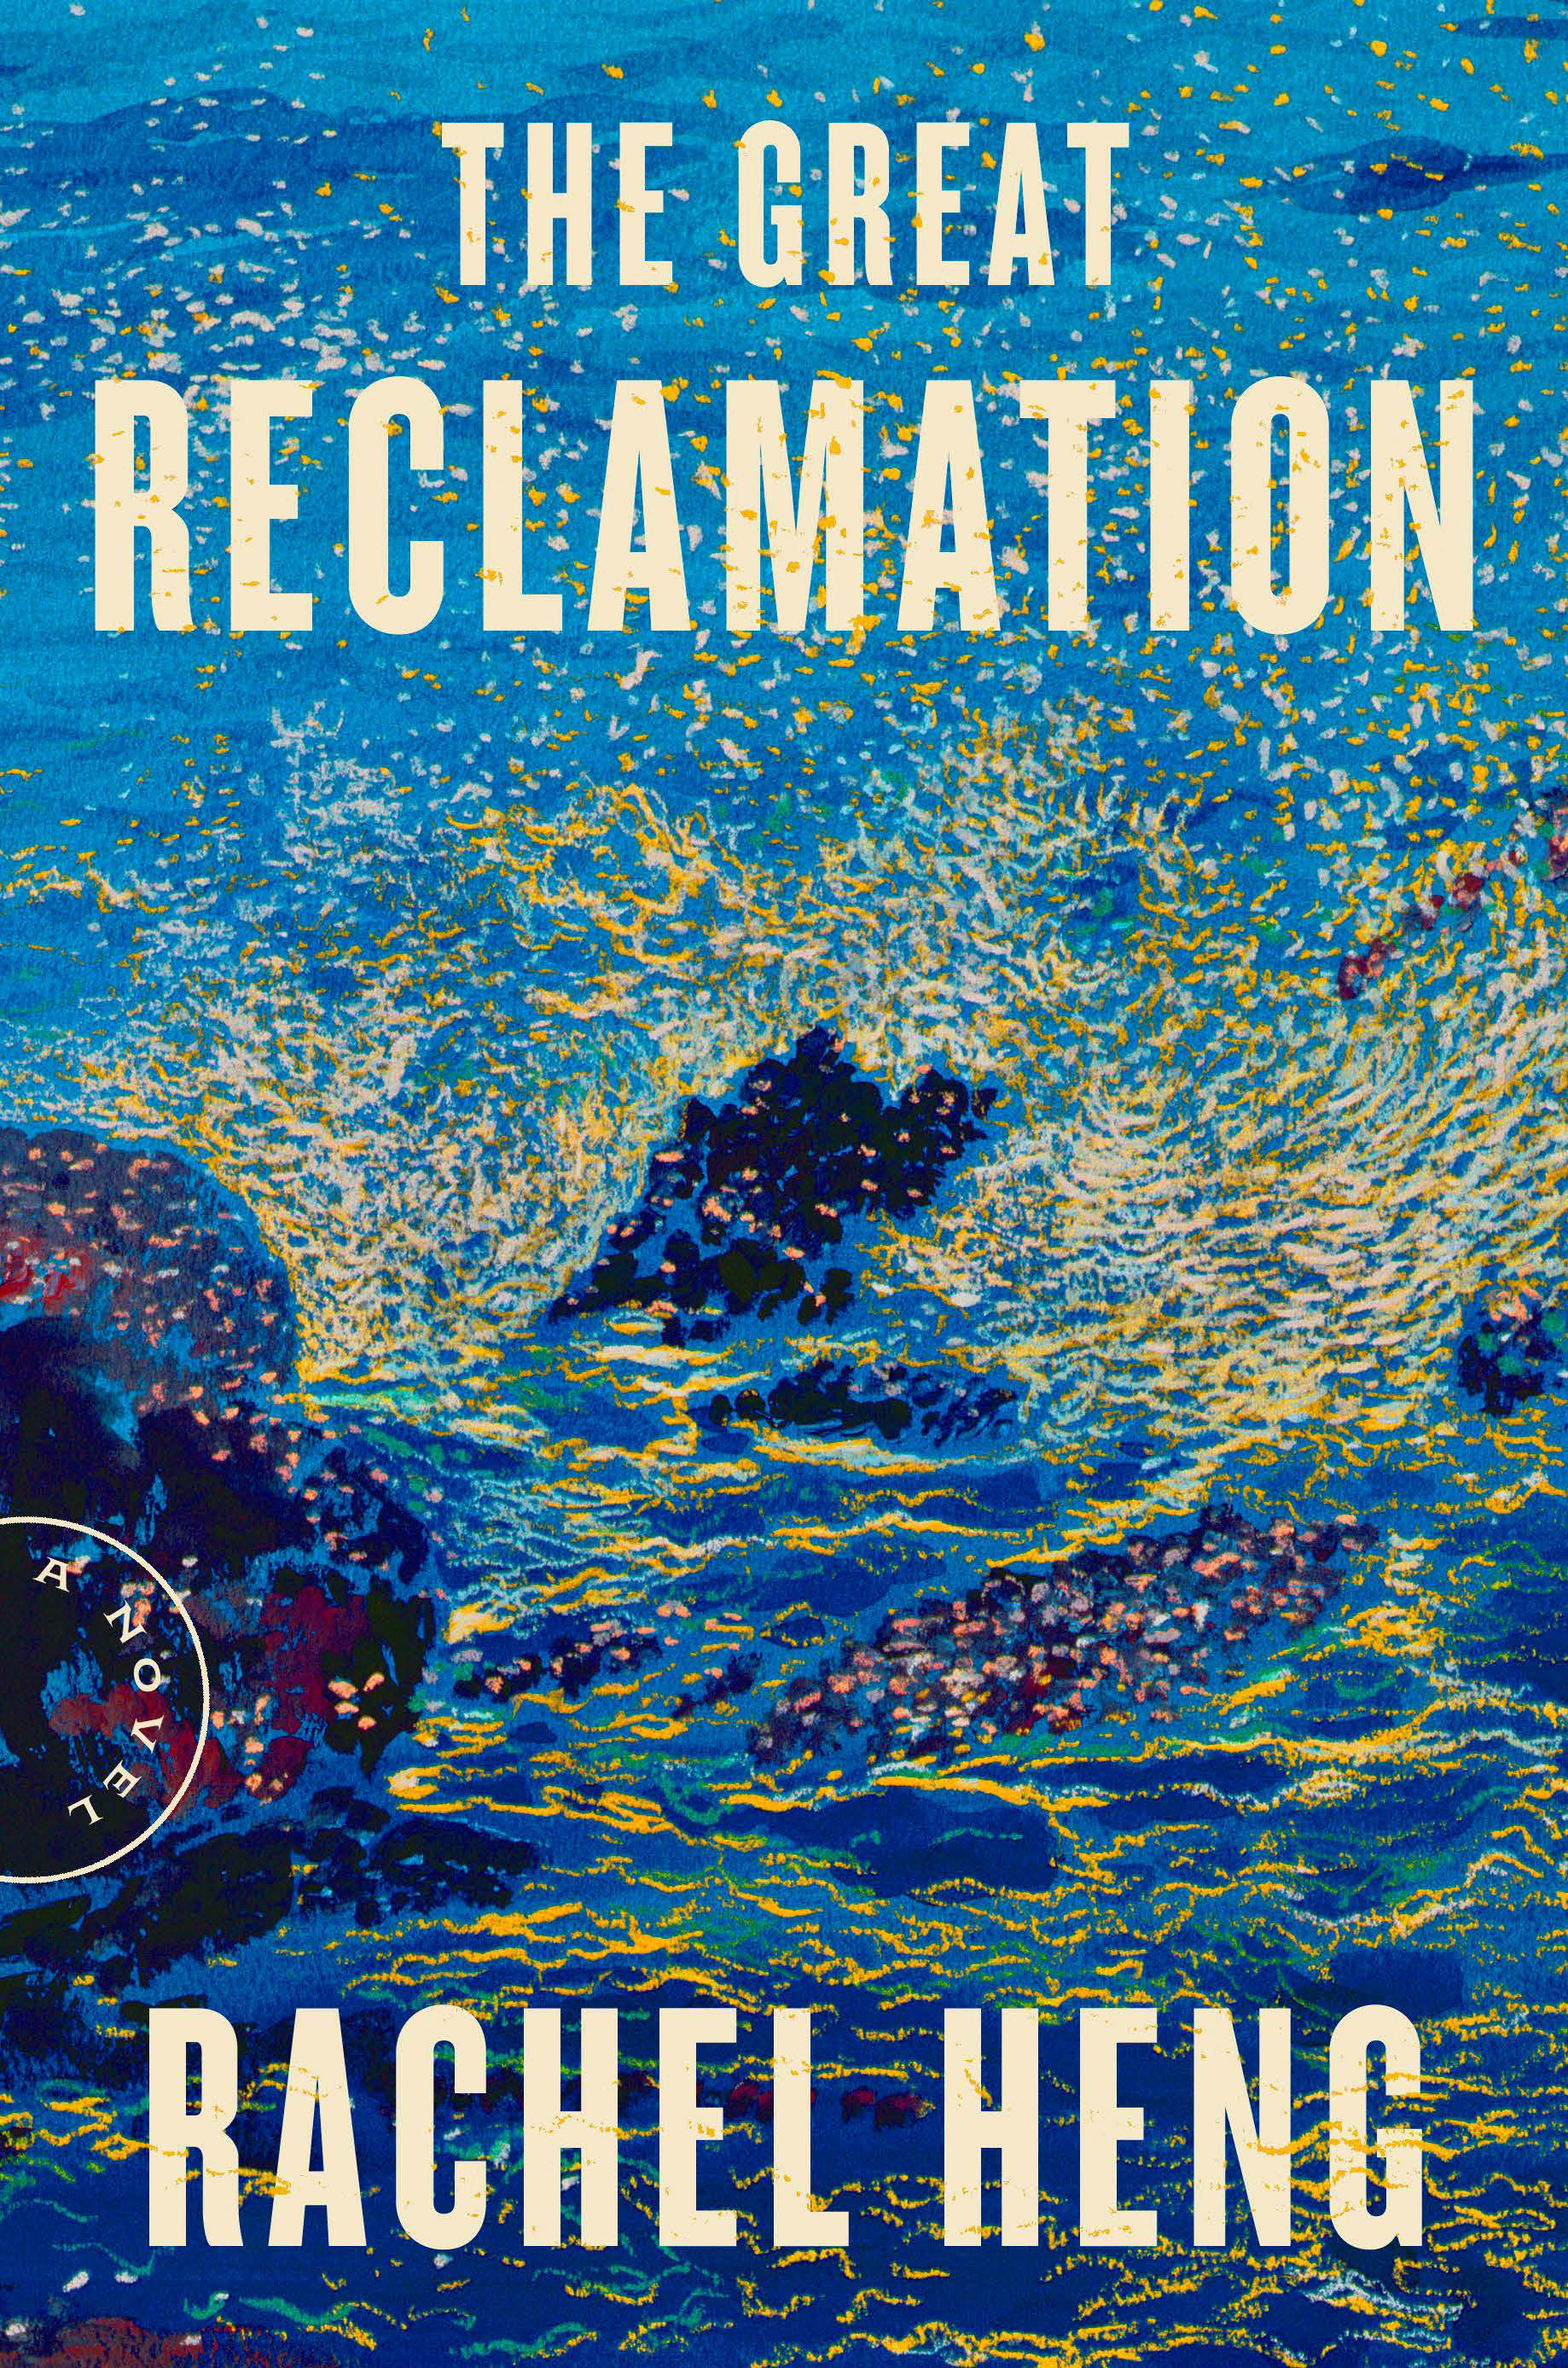 The Great Reclamation (Hardcover Book)